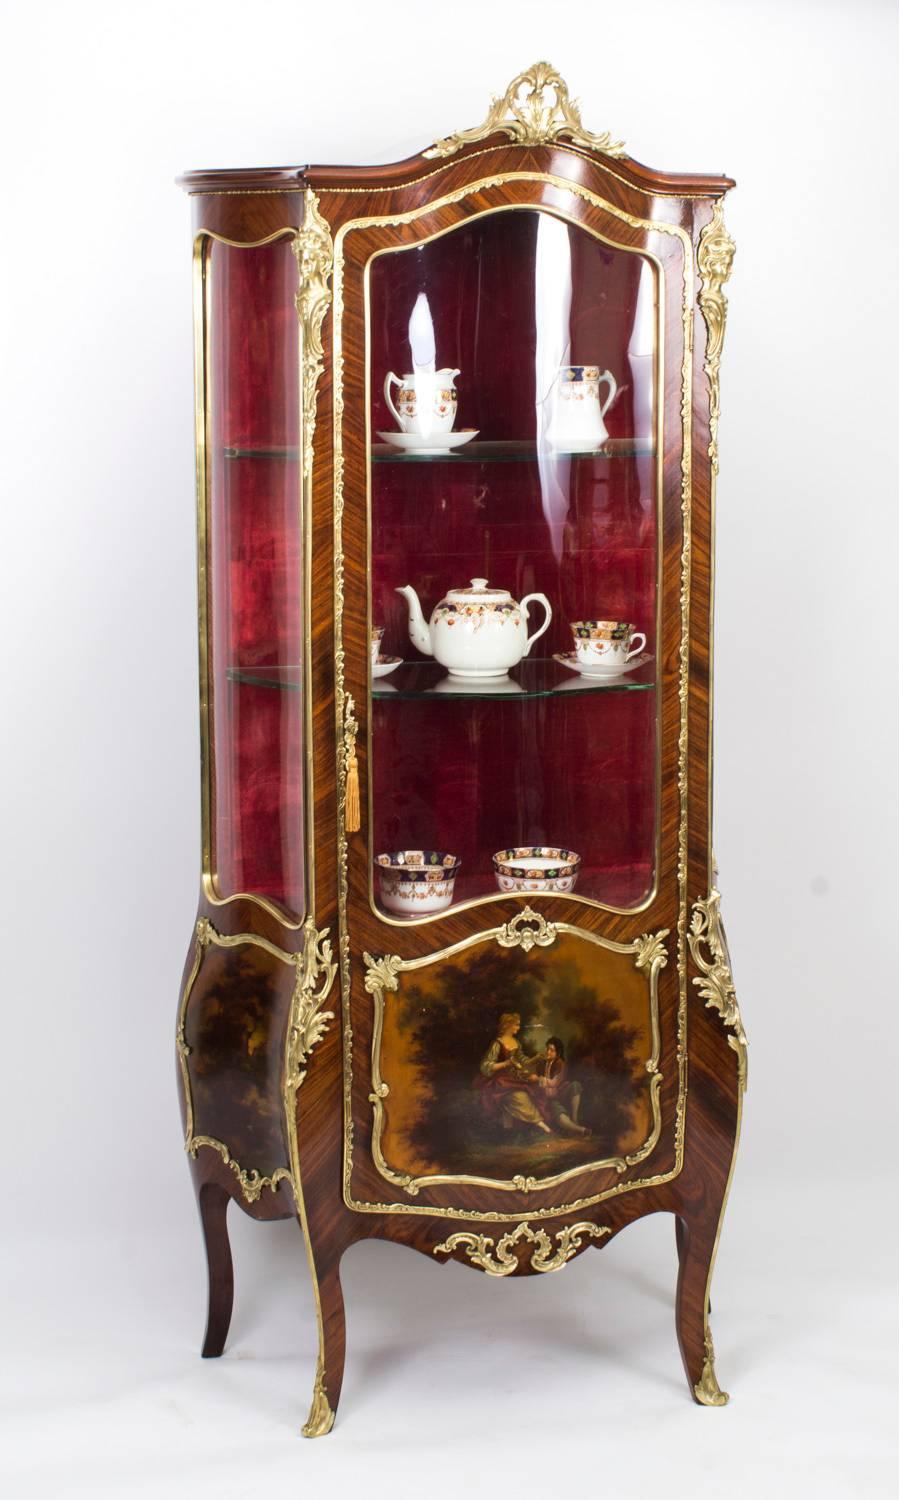 This is a stunning antique French kingwood Vernis Martin vitrine in the Louis XV manner, circa 1880 in date. The base features three hand-painted Vernis Martin panels, the central panel is signed by the artist, Albertini, who was renowned for